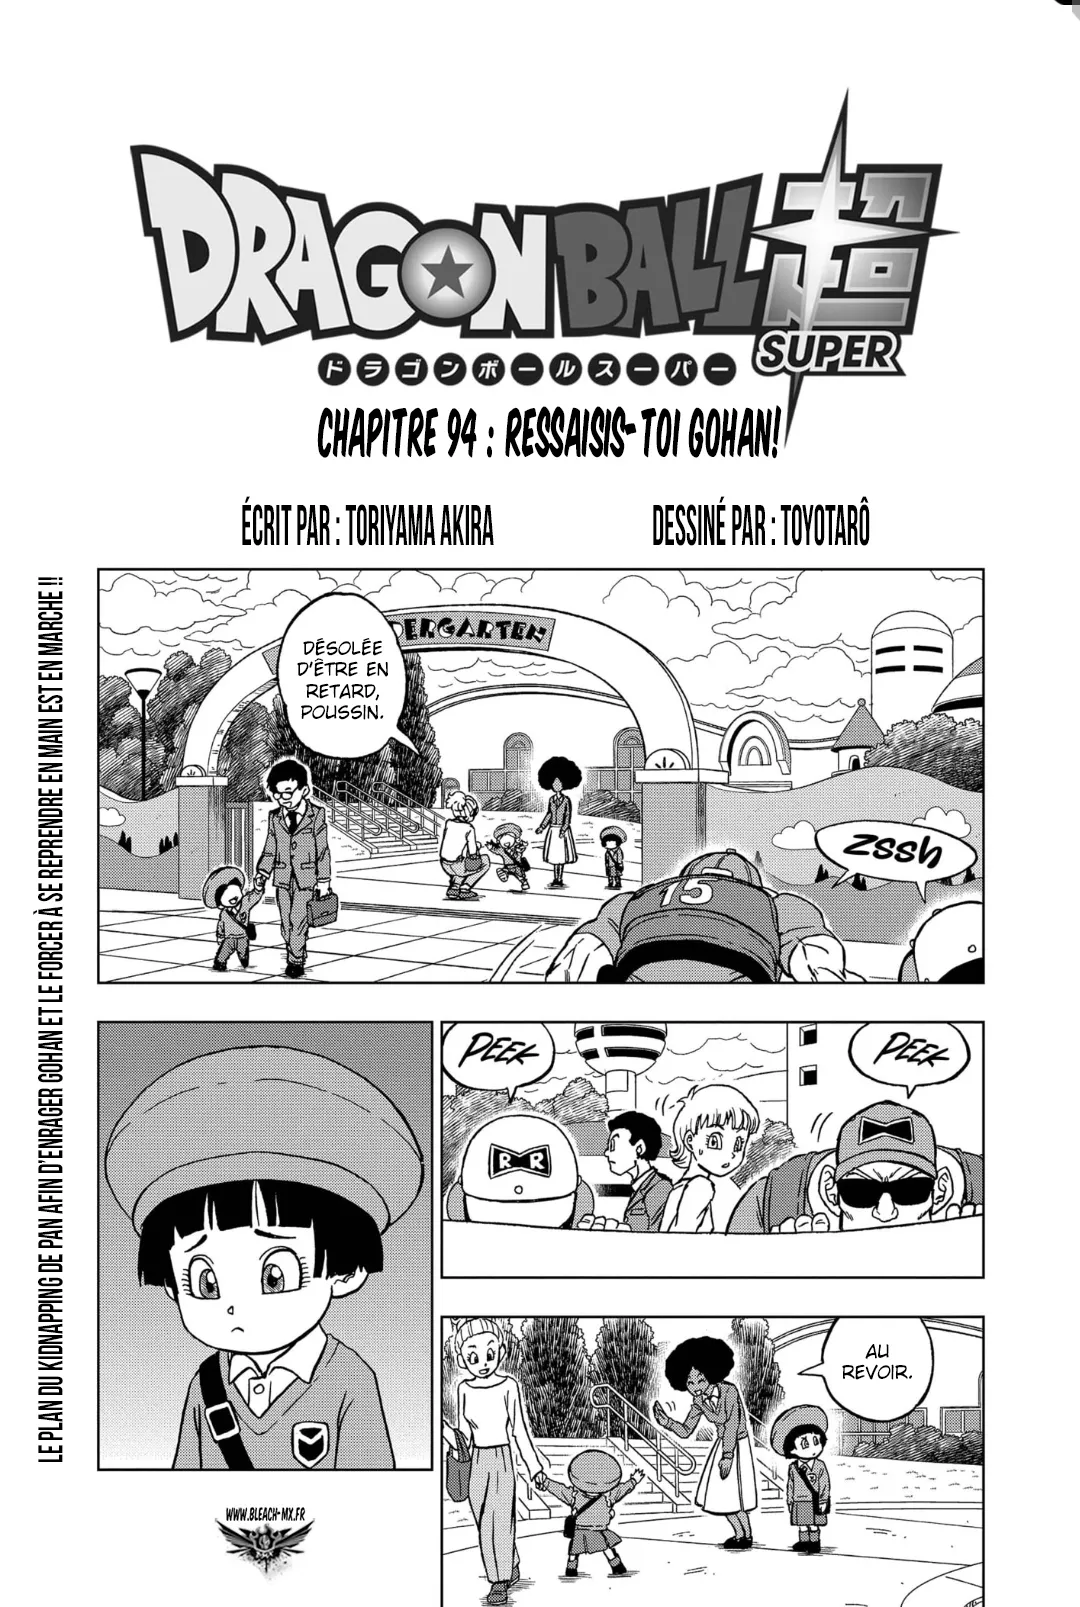 Dragon Ball Super: Chapter chapitre-94 - Page 1